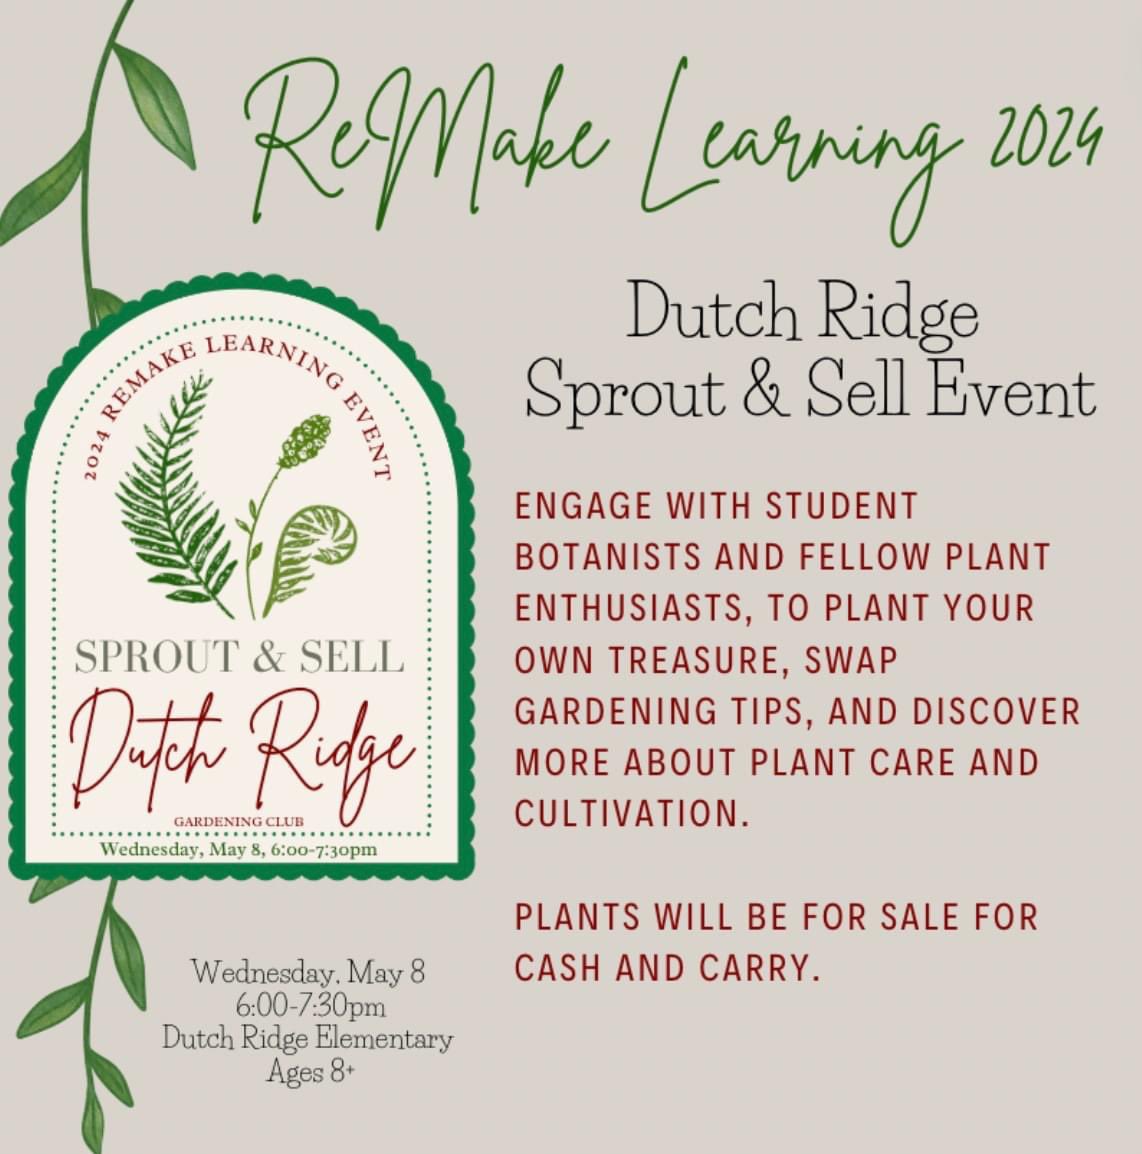 Tomorrow evening 6:00 PM come hang out with the Dutch Ridge Gardening Club for their Sprout and Sell Event.  More info and RSVP at tinyurl.com/DR-RLD-2024
#RemakeDays #RemakeDaysSWPA